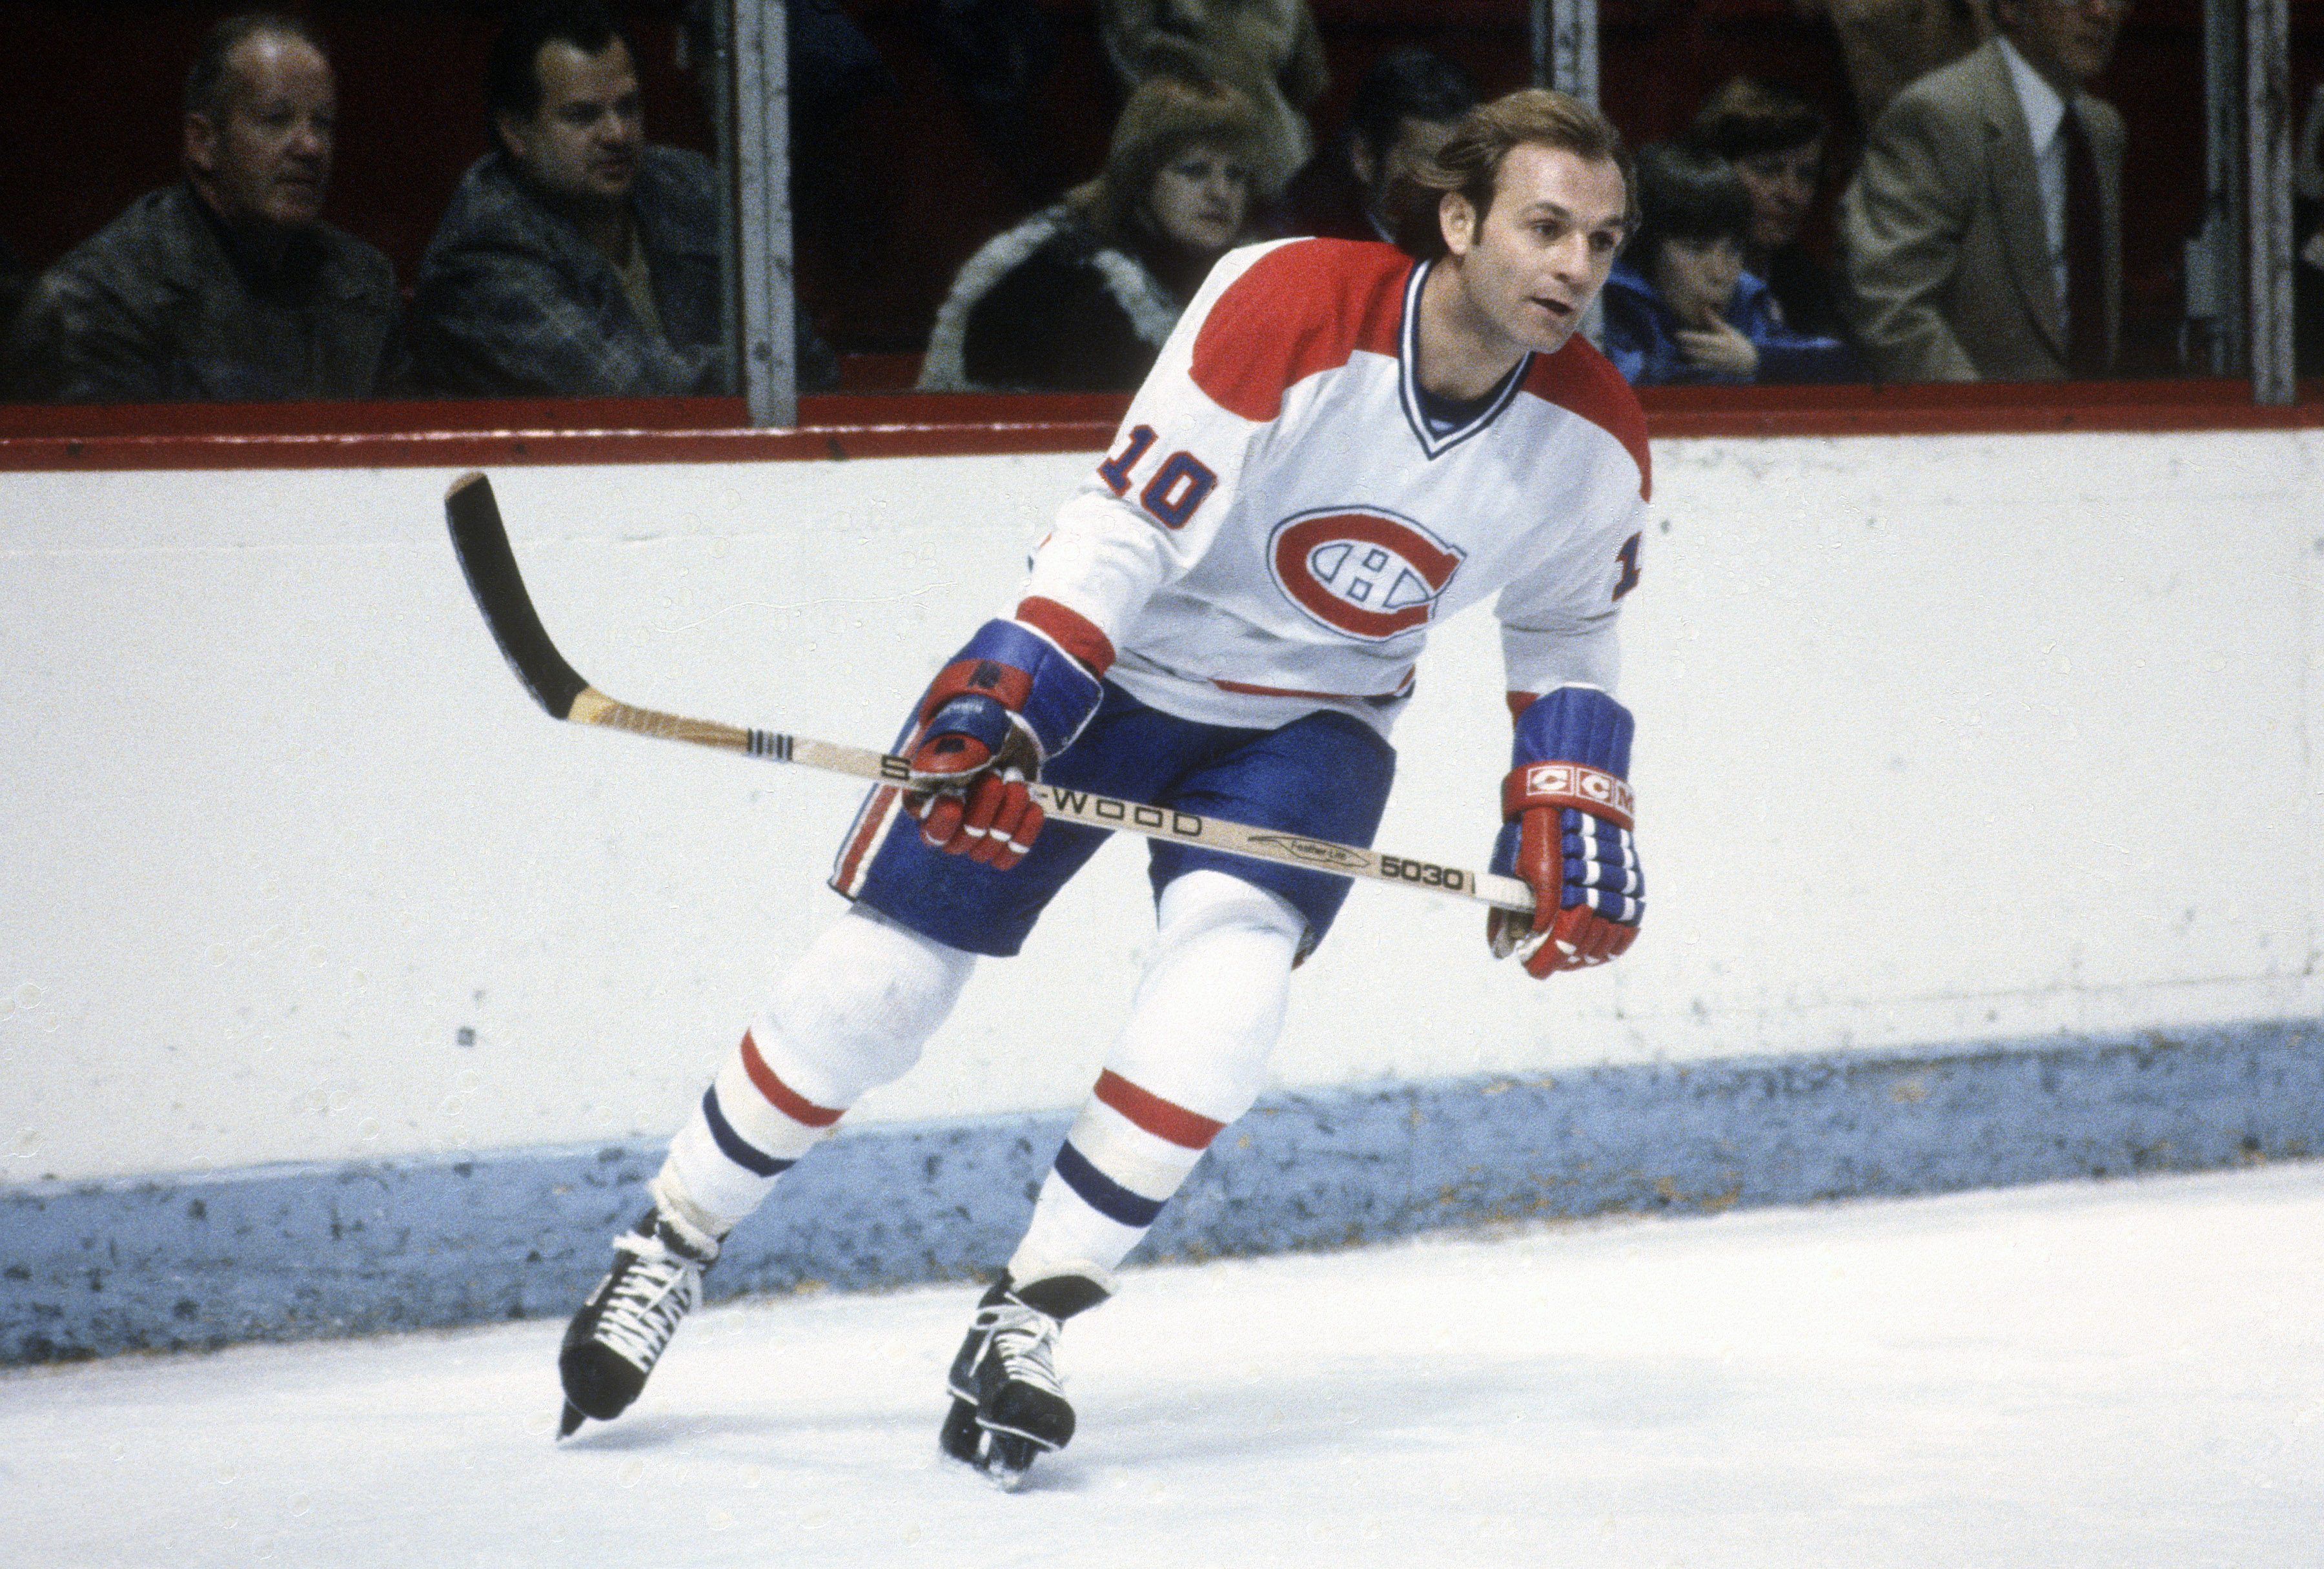 Guy Lafleur Dies at Age 70; Hall of Famer Won NHL Stanley Cup 5 Times with Canadiens